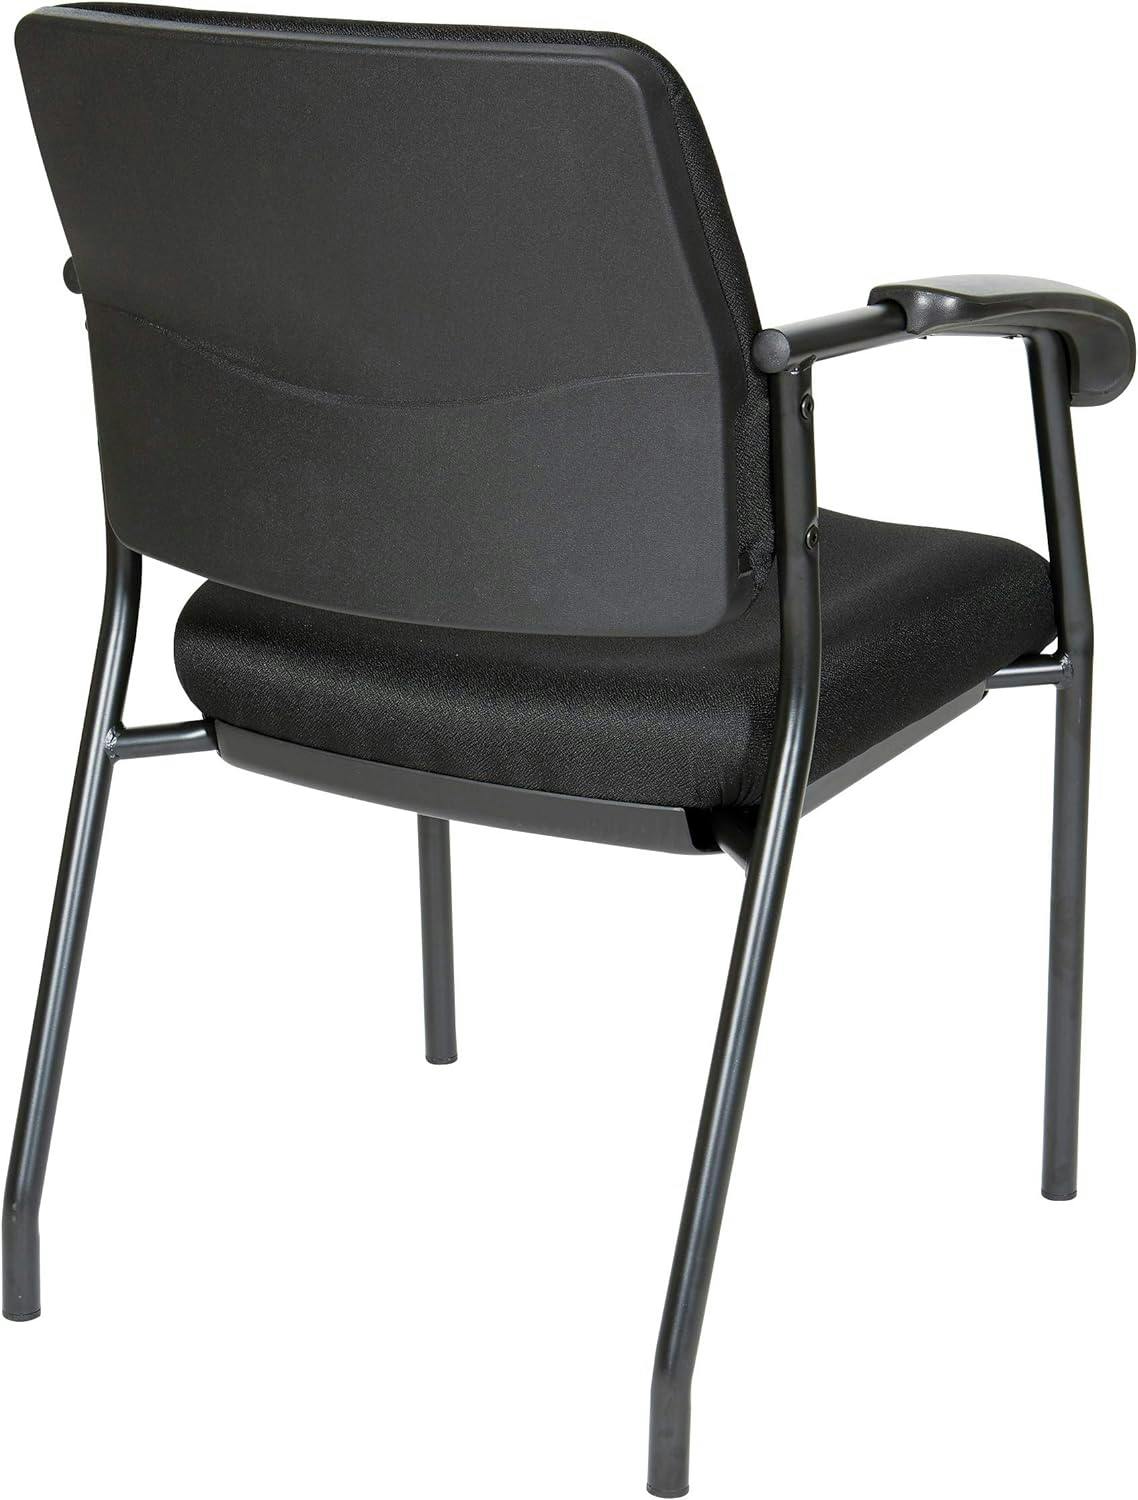 Ergonomic Black Fabric Office Chair with Metal Finish and Padded Armrests